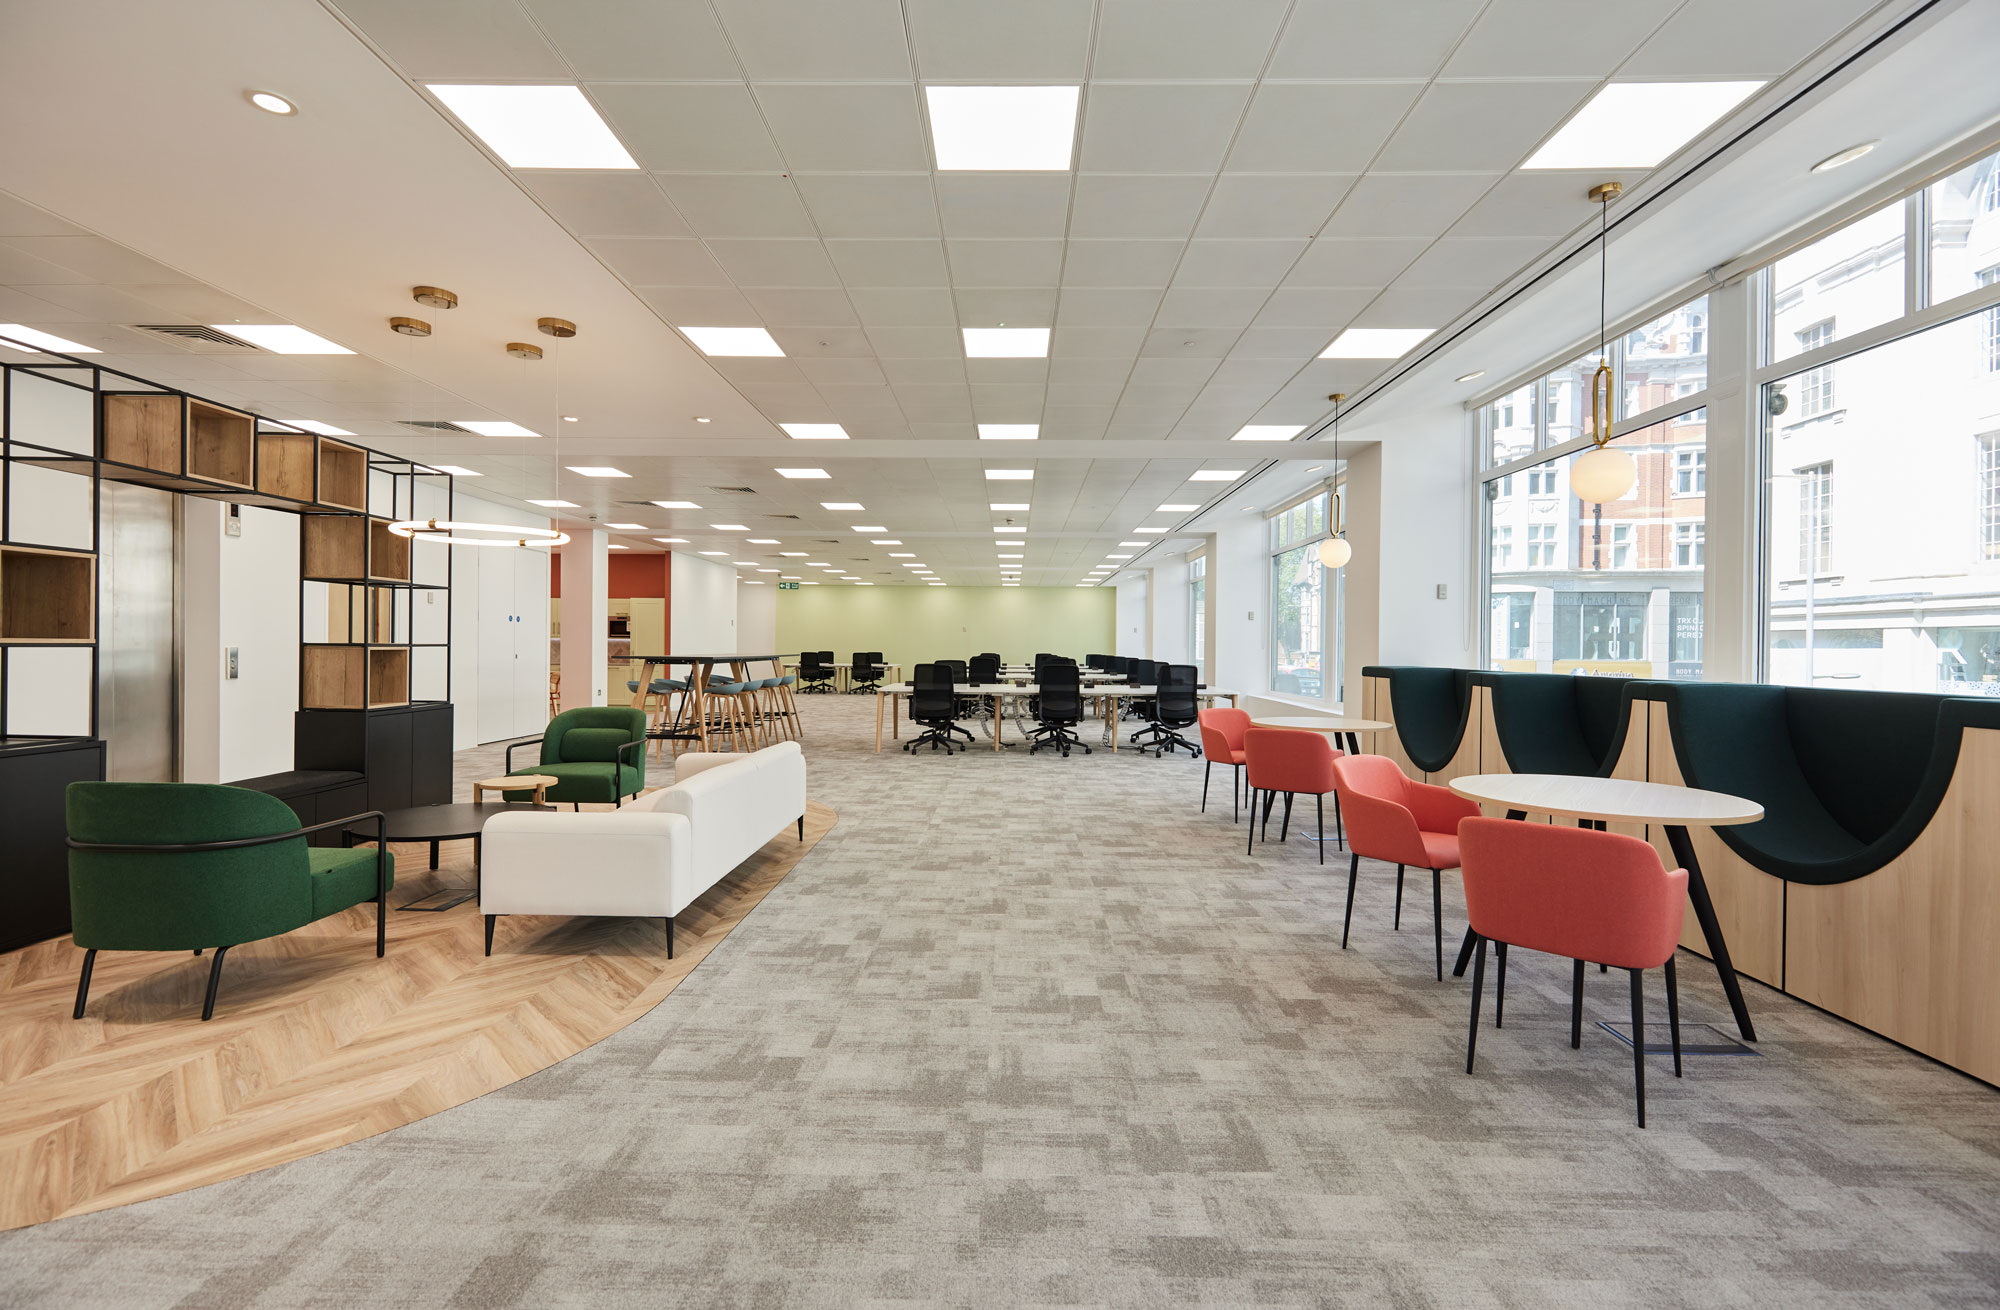 A modern, collaborative workspace designed with art deco furniture and feature lighting